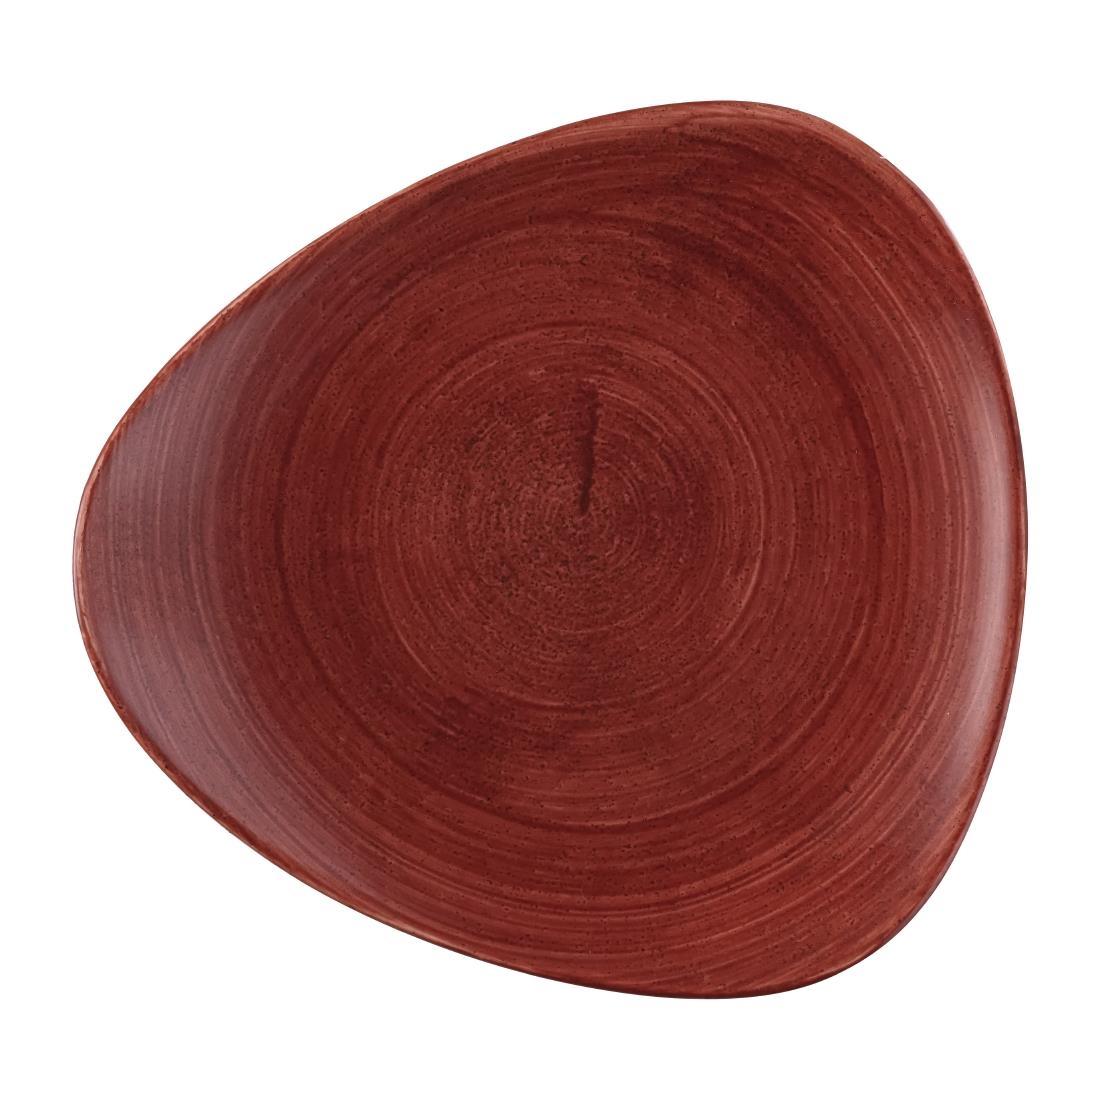 Churchill Stonecast Patina Lotus Plate Red Rust 229mm (Pack of 12) - FS885  - 1